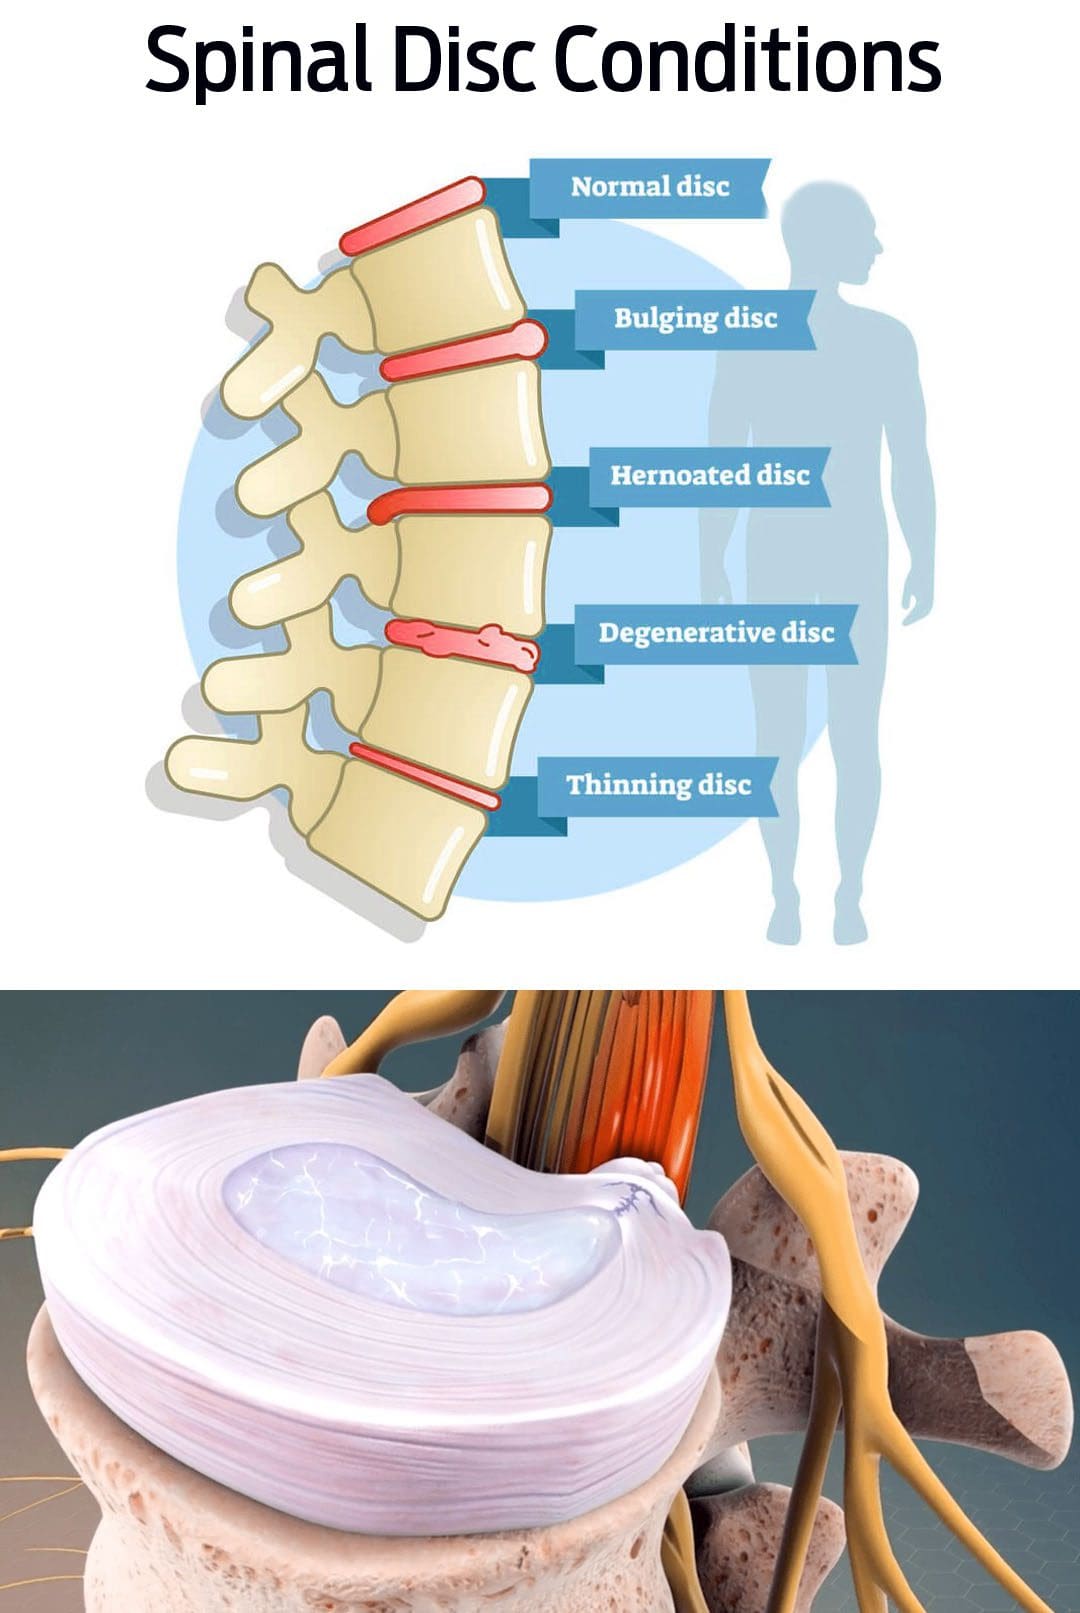 The Complete Guide to Bulging Disc Pain Symptoms